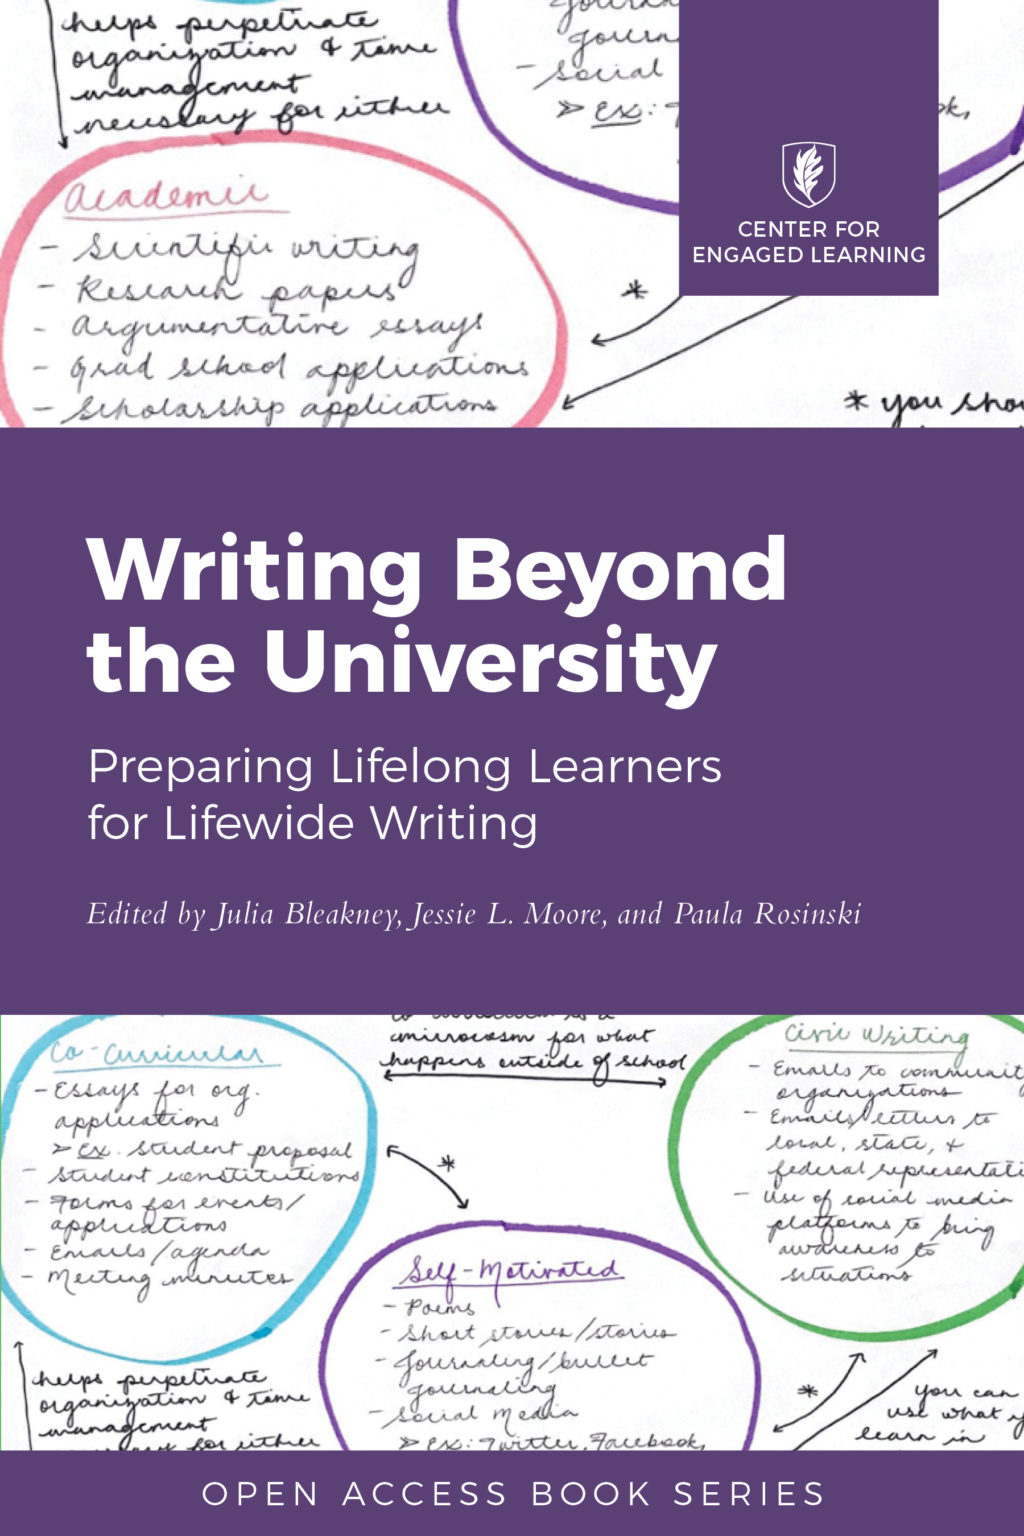 Writing Beyond the University book cover